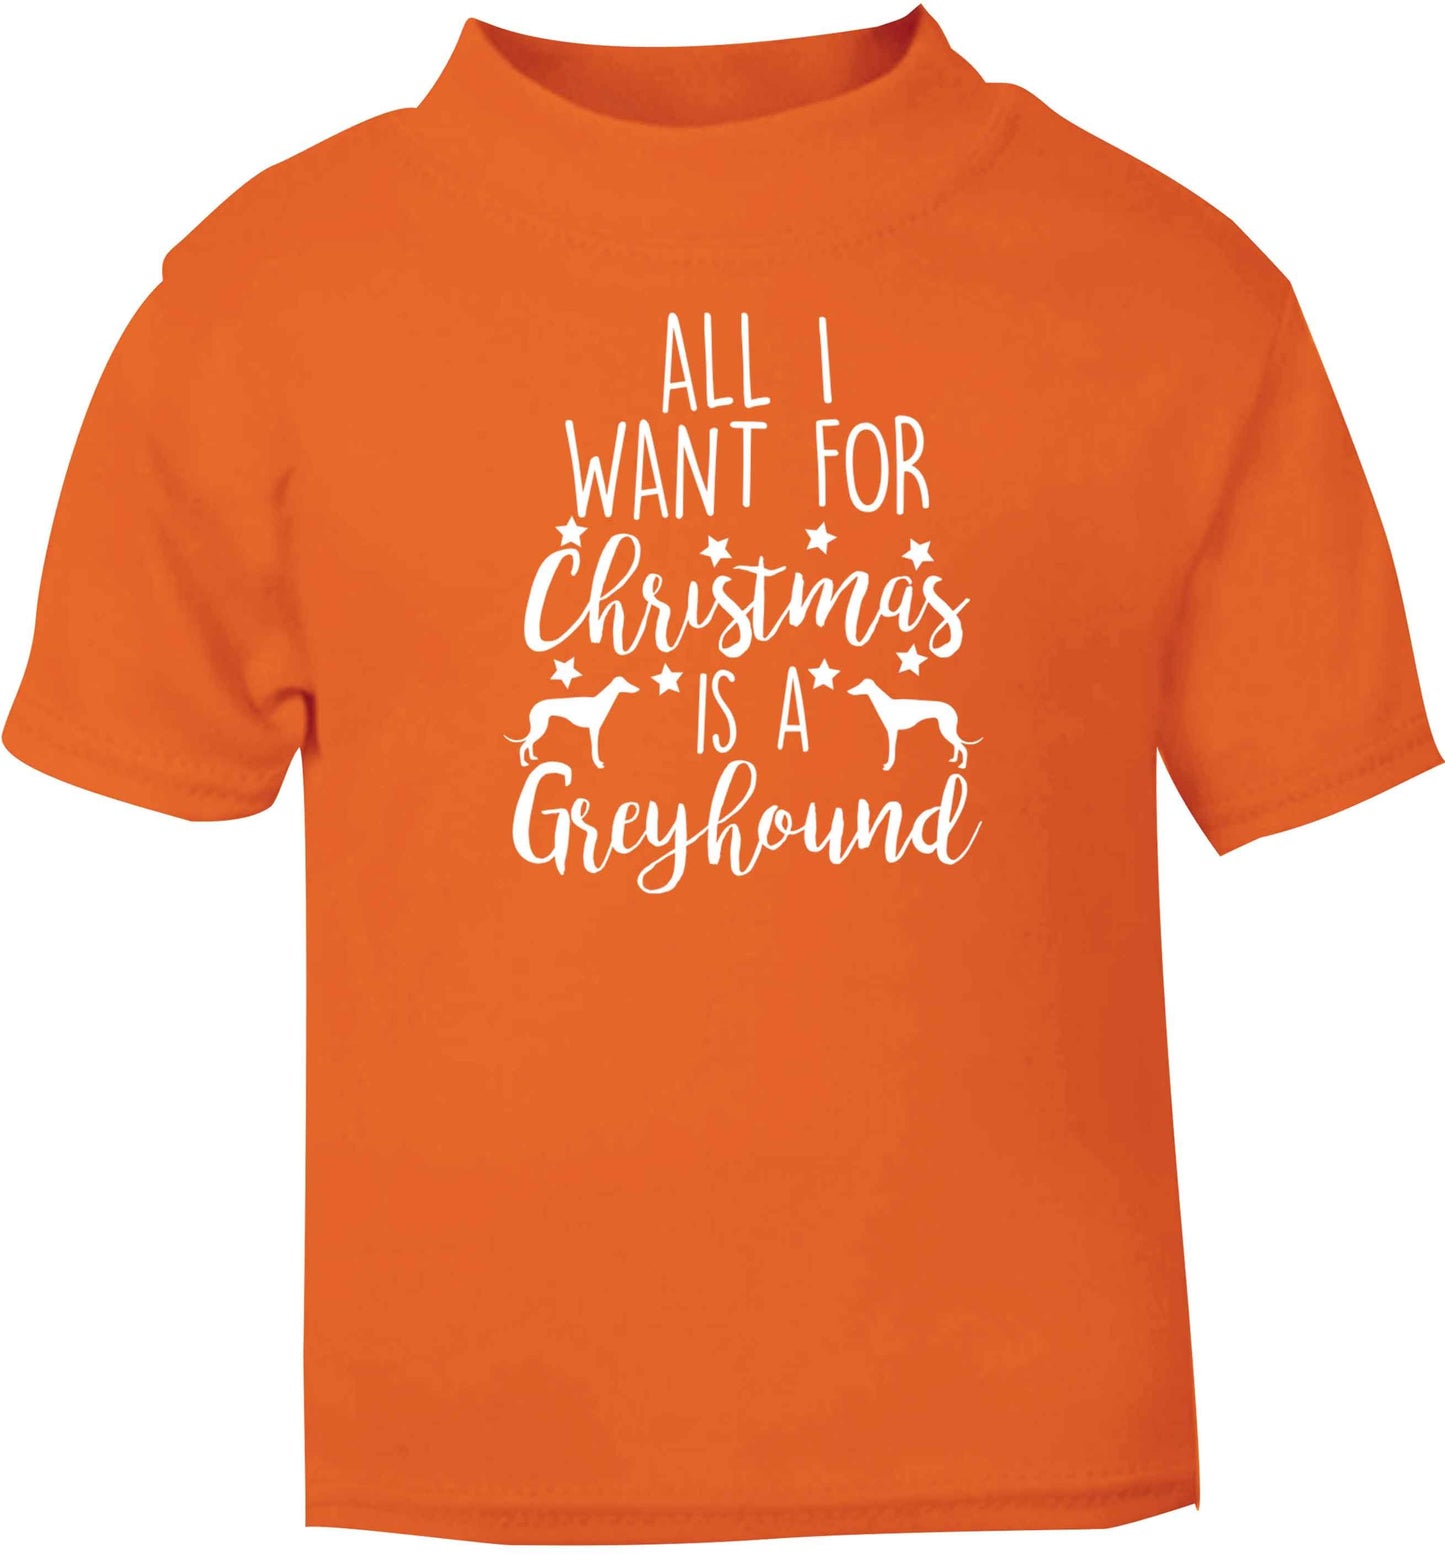 All I want for Christmas is a greyhound orange baby toddler Tshirt 2 Years